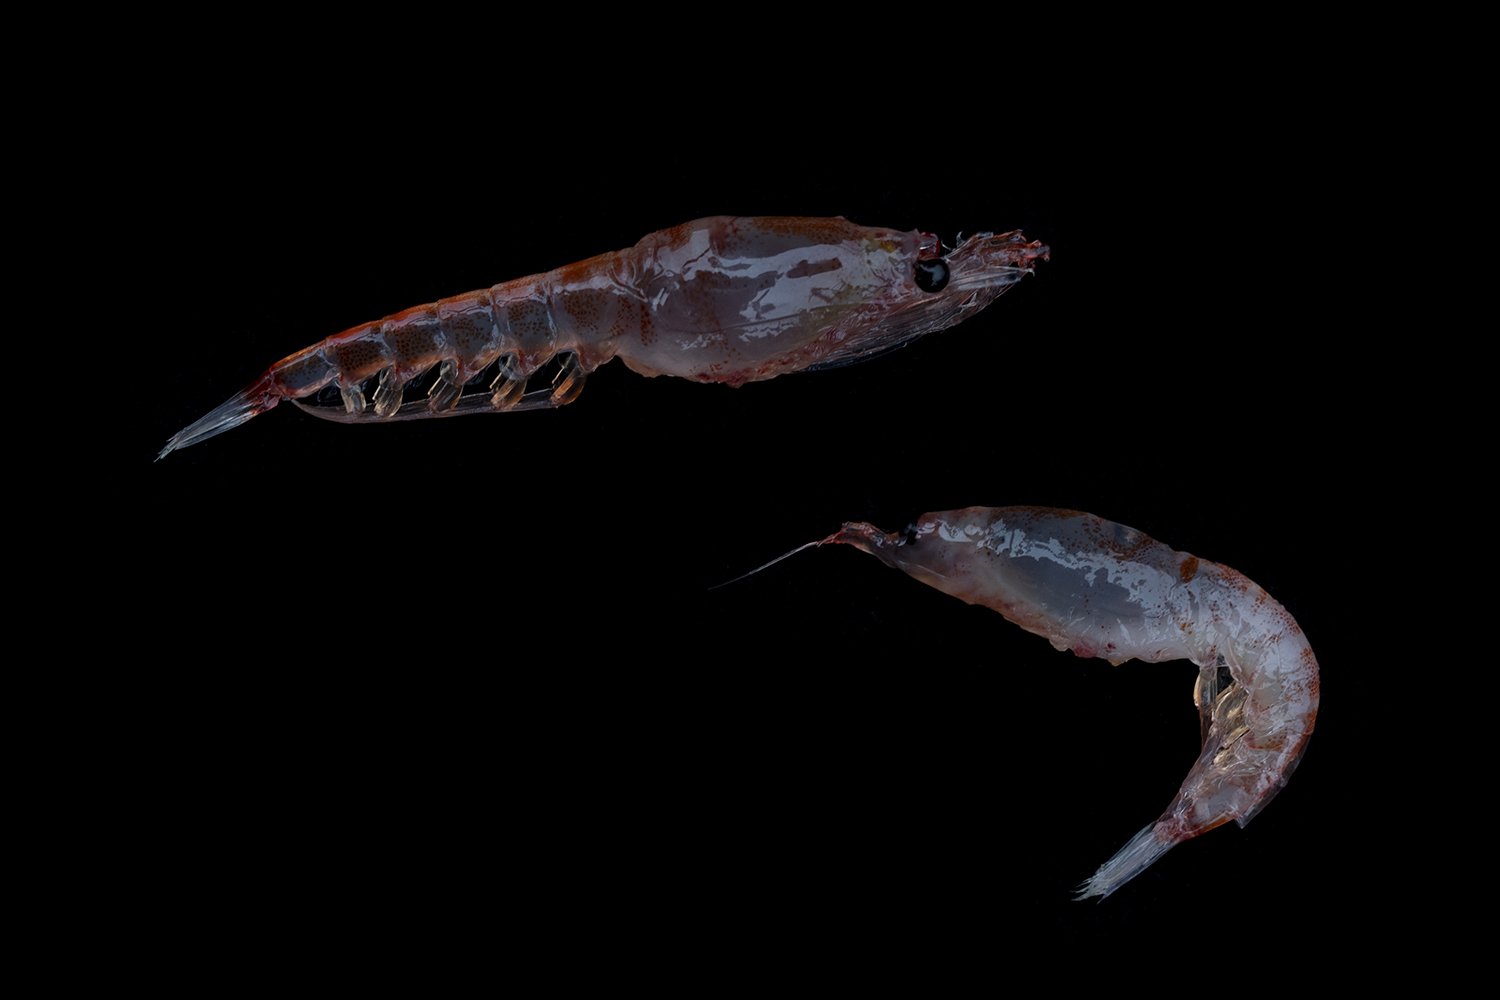 Krill, Euphausia superba, represent a critical component of the Antarctic food web, providing food for fish, whales, seals, penguins, albatross and other seabirds, as well as marine invertebrates.